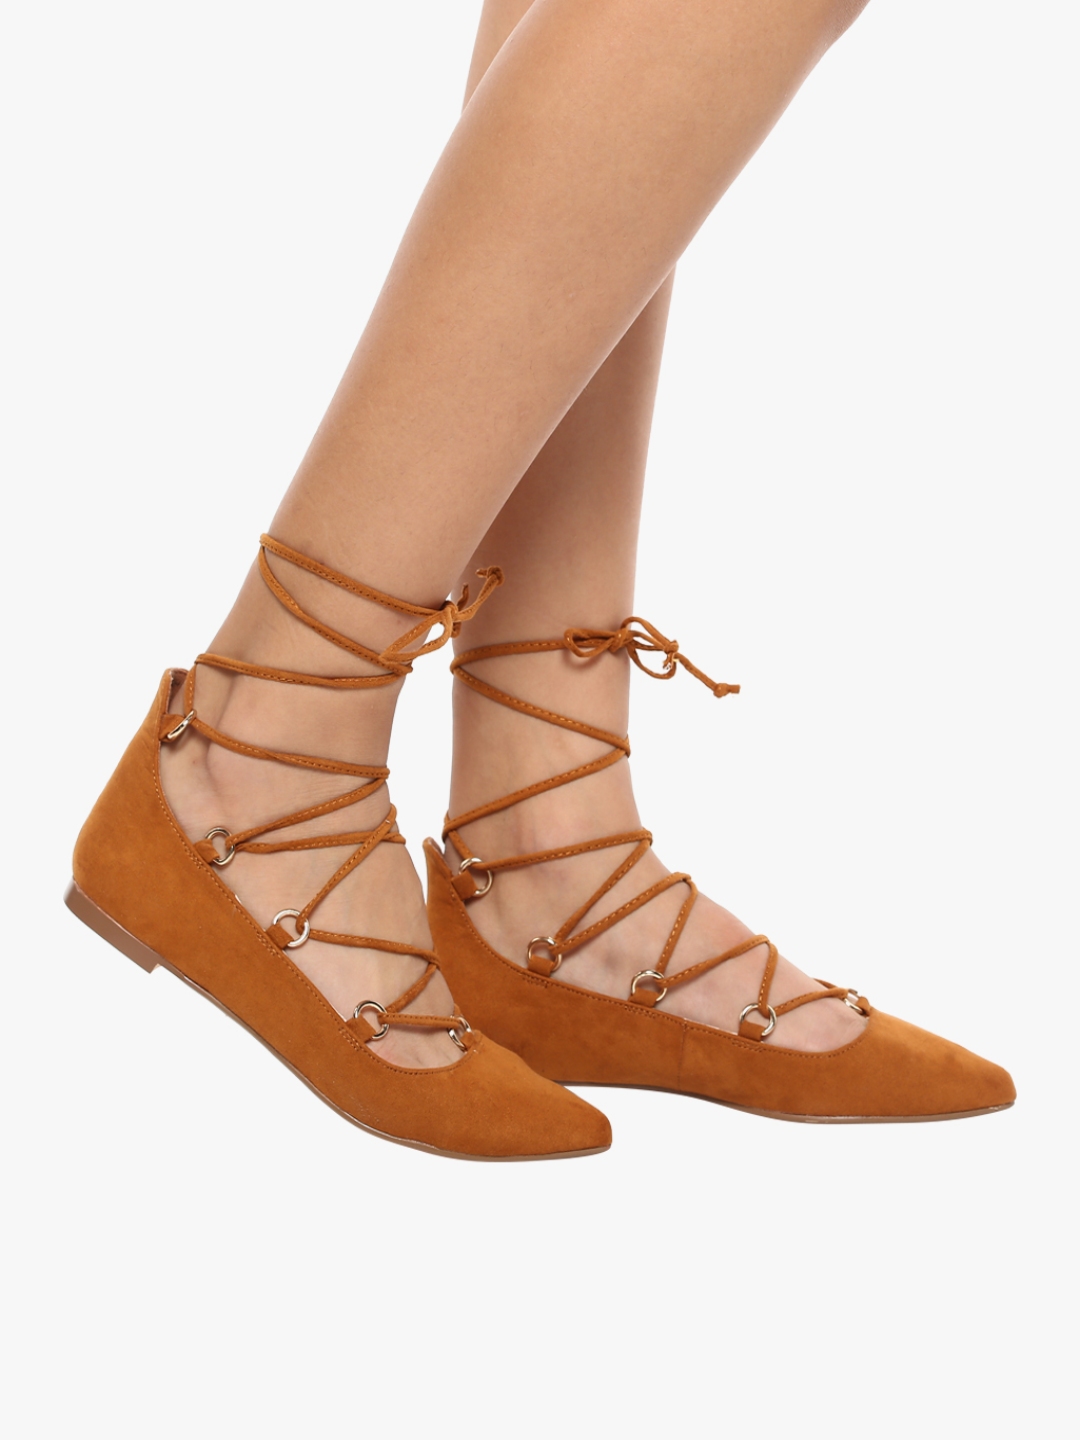 Buy Tan Tie Up Belly Shoes - Flats for 